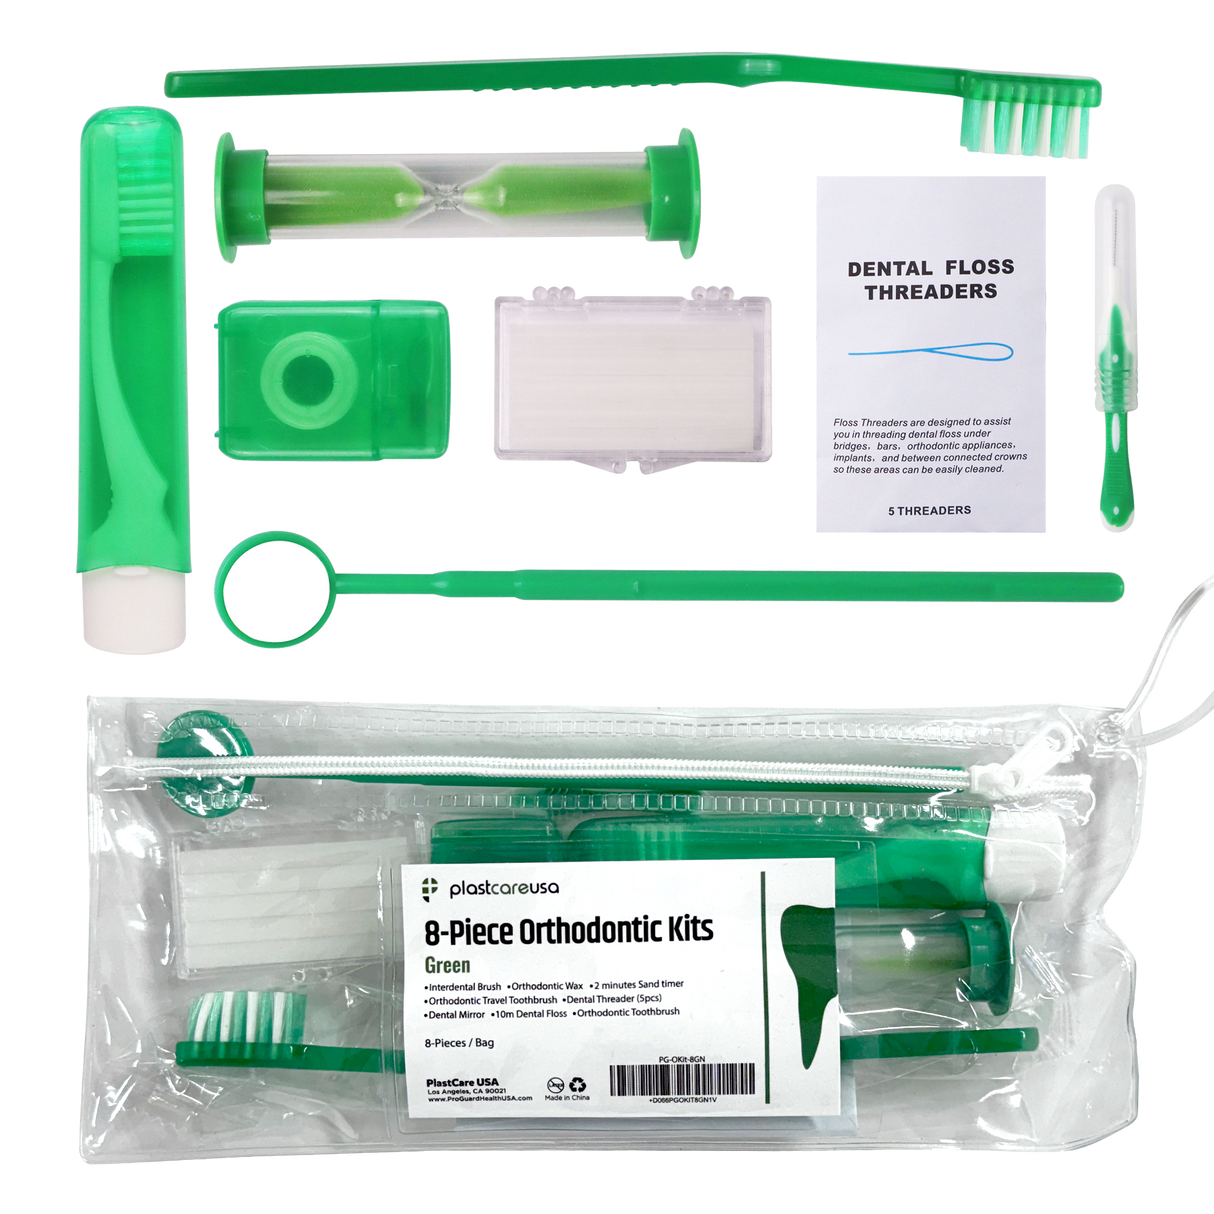 12 Pack of Green Orthodontic 8 Piece Patient Kits